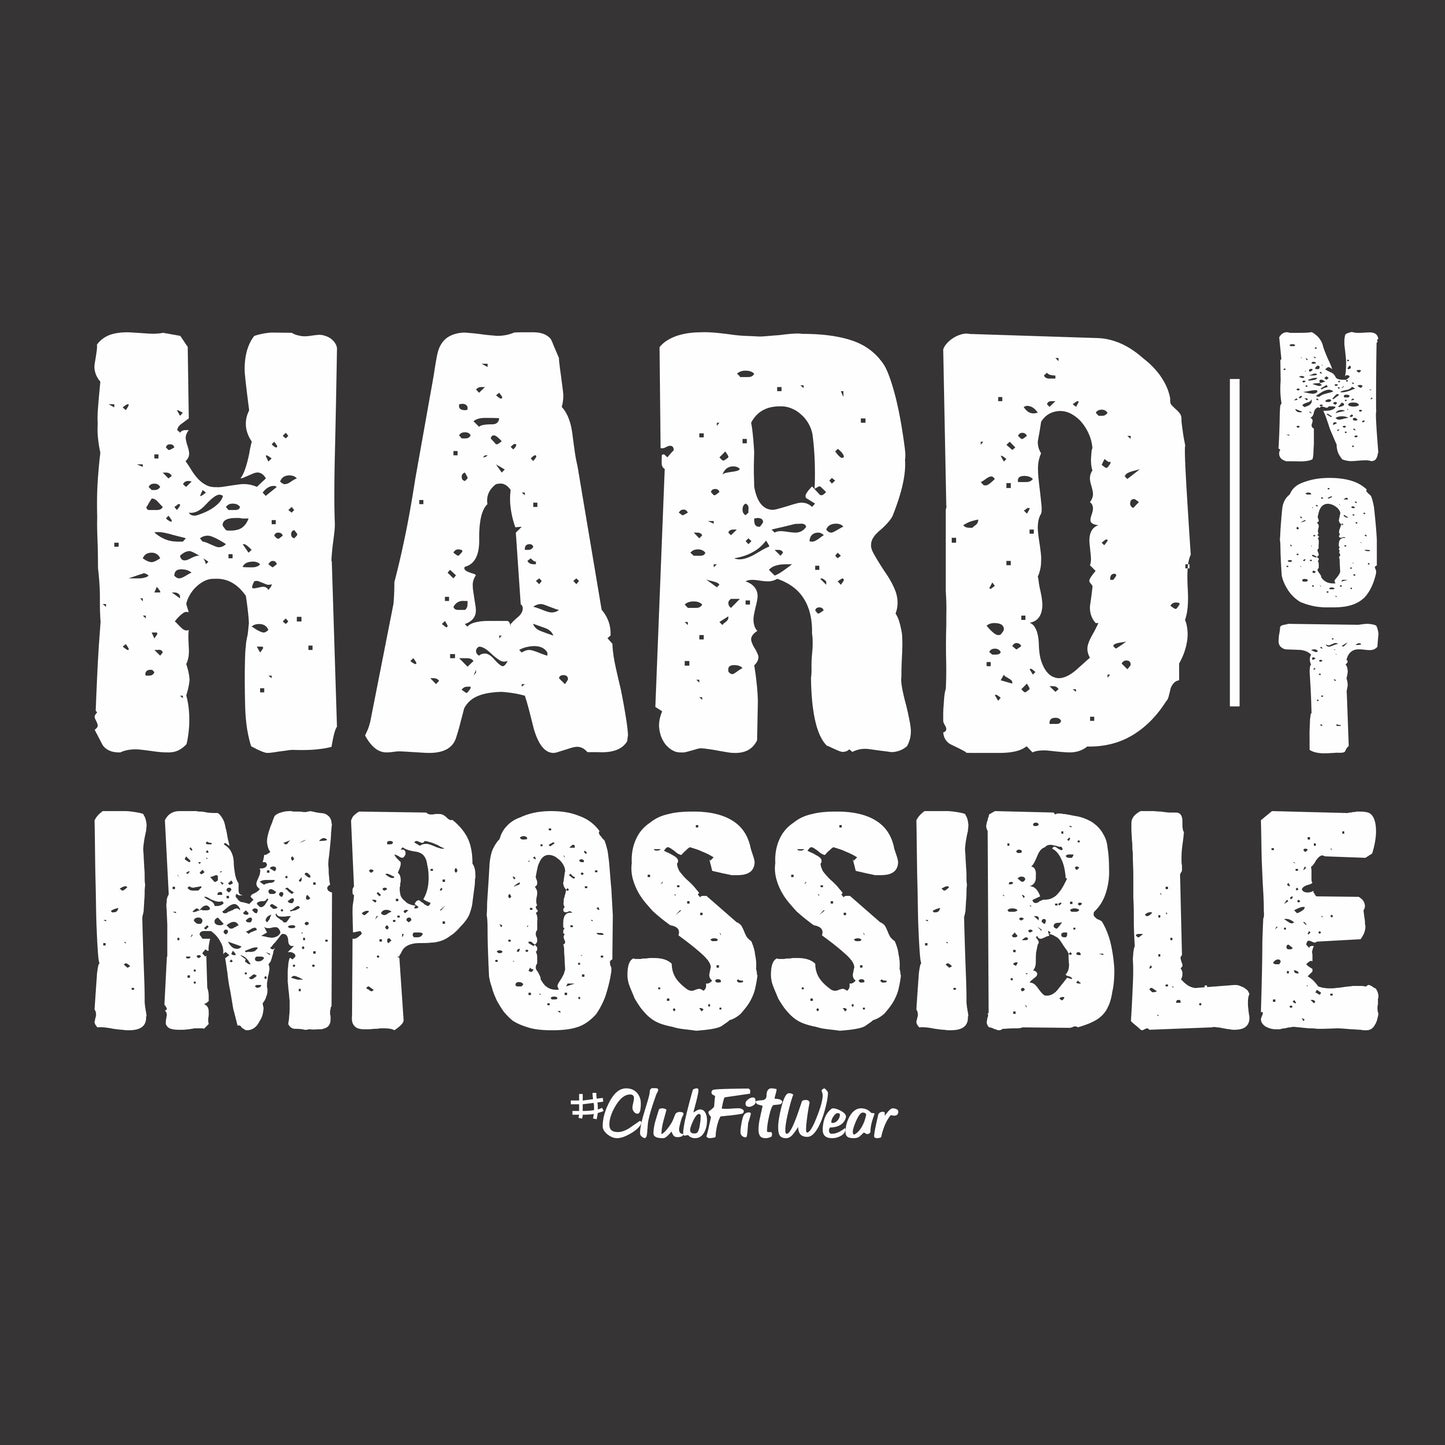 Hard Not Impossible